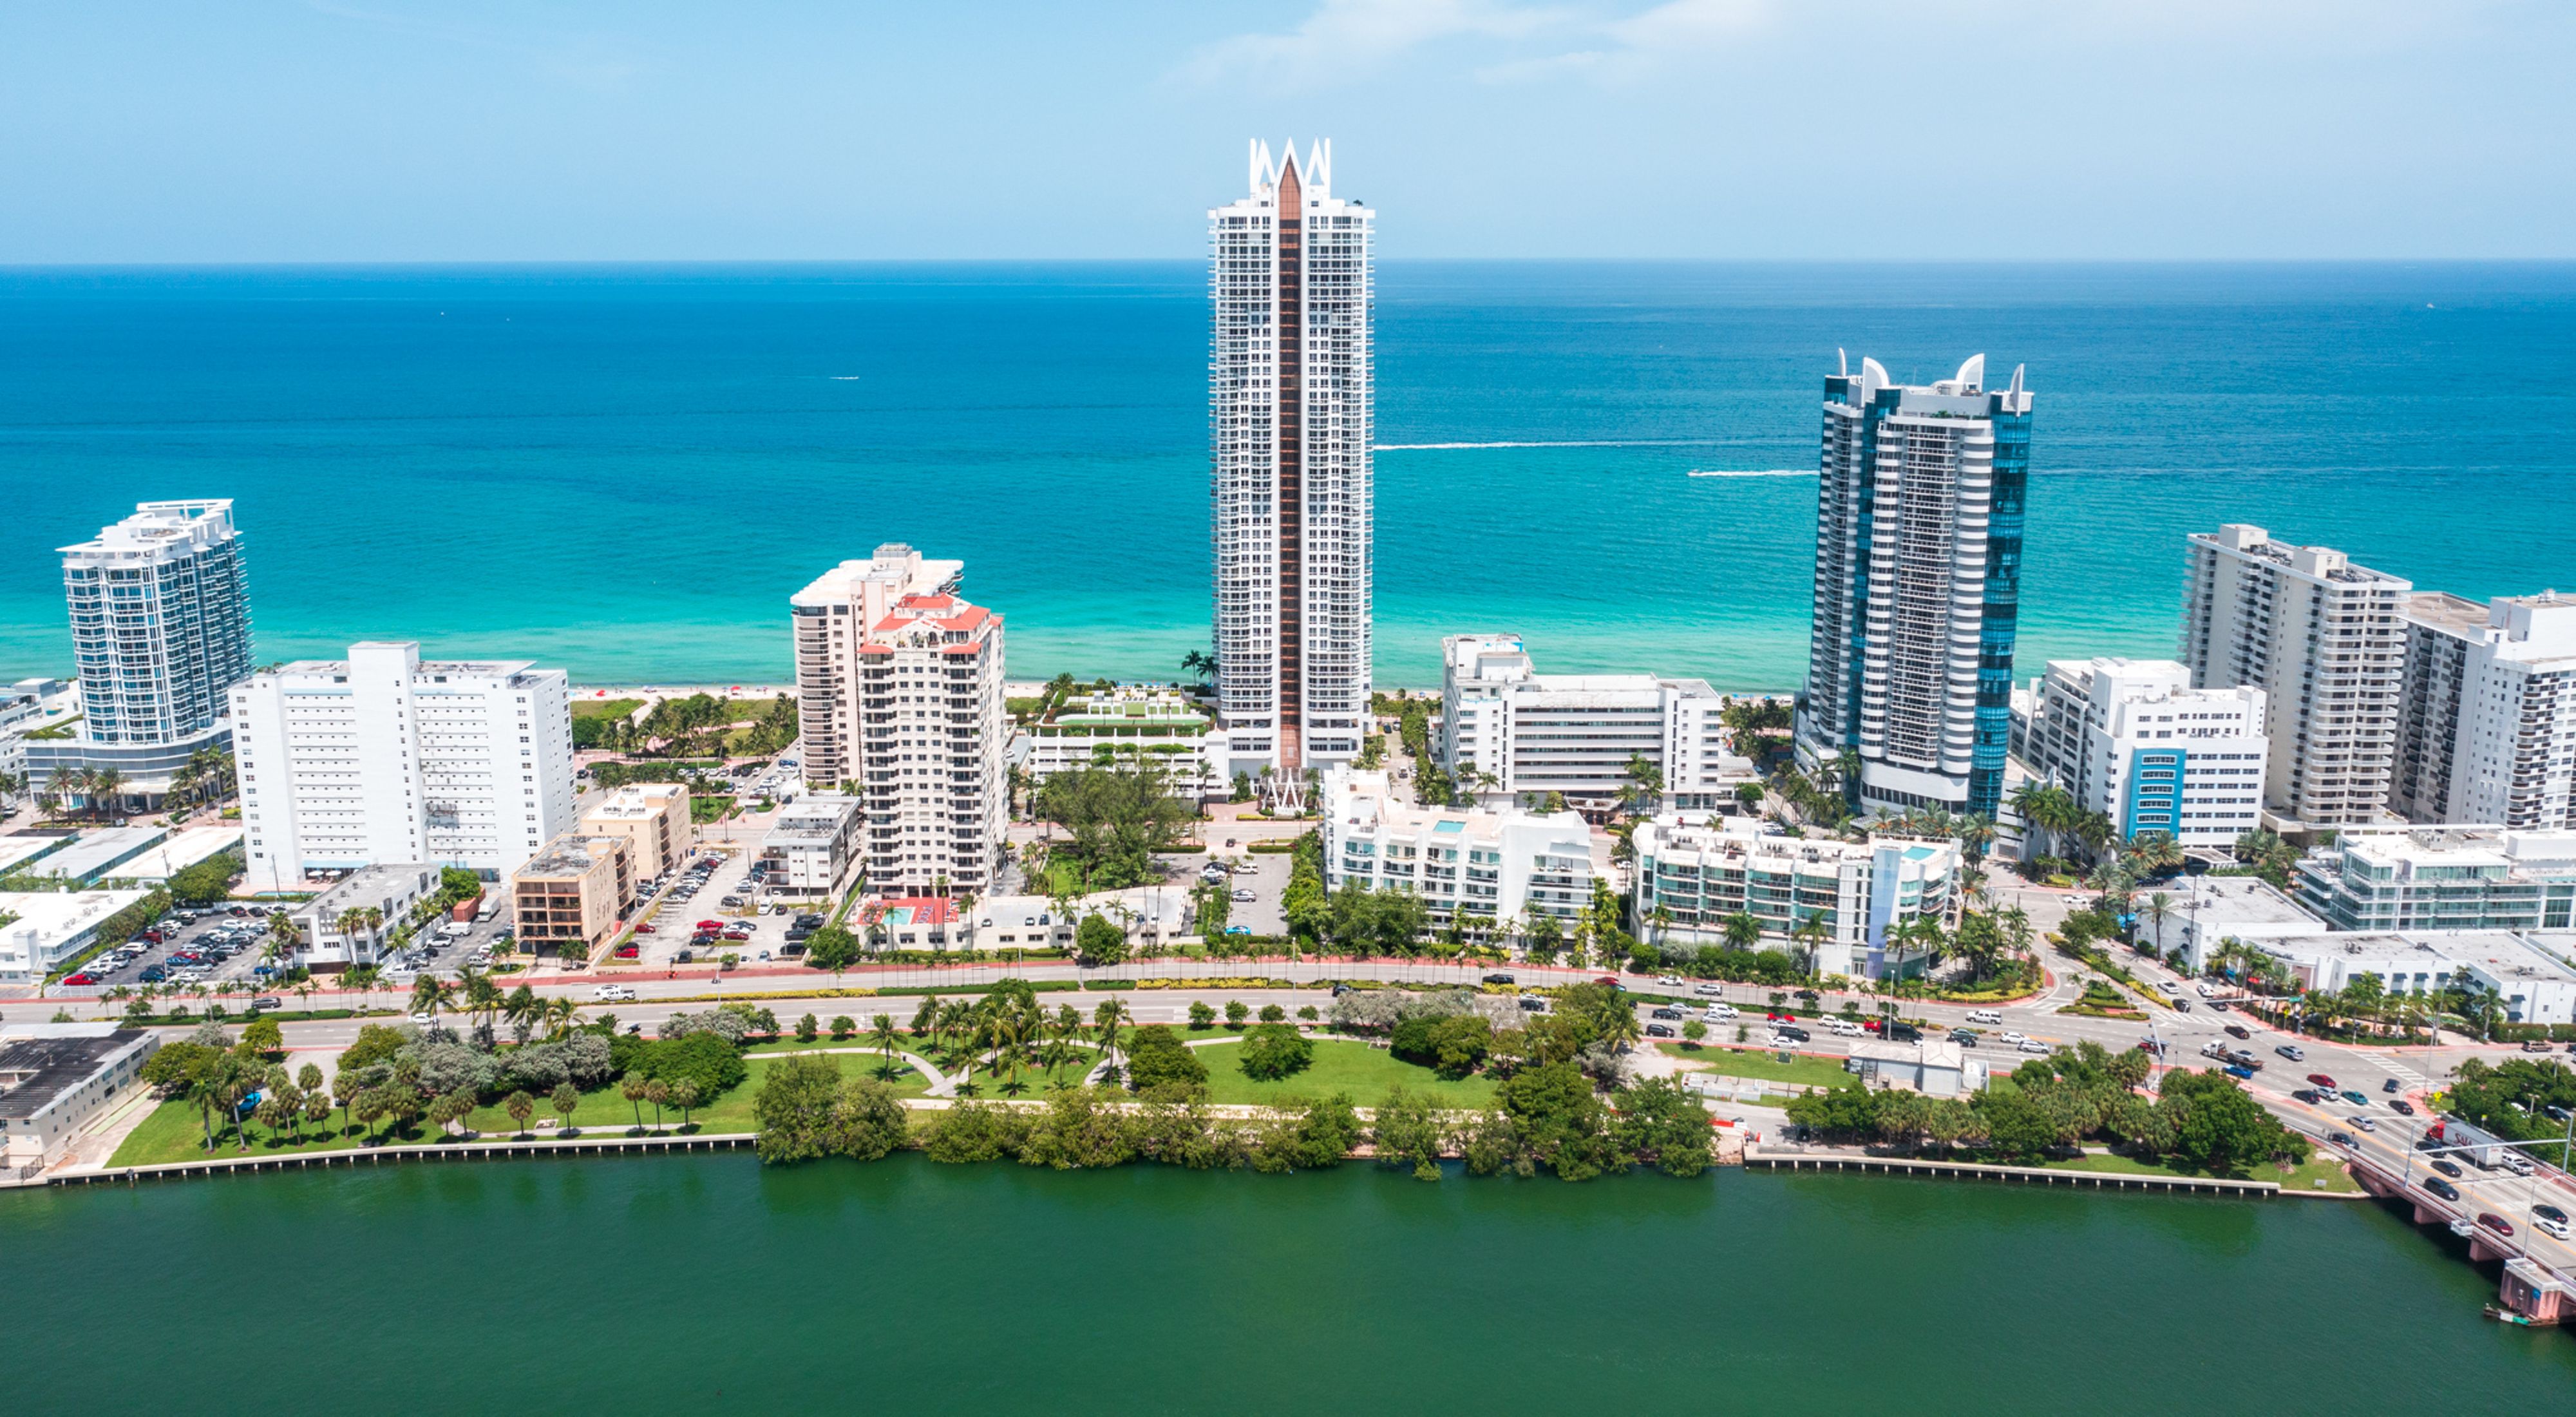 Aerial view of Brittany Bay Park in Miami Beach, which sits along the shoreline with high-rise buildings behind it.